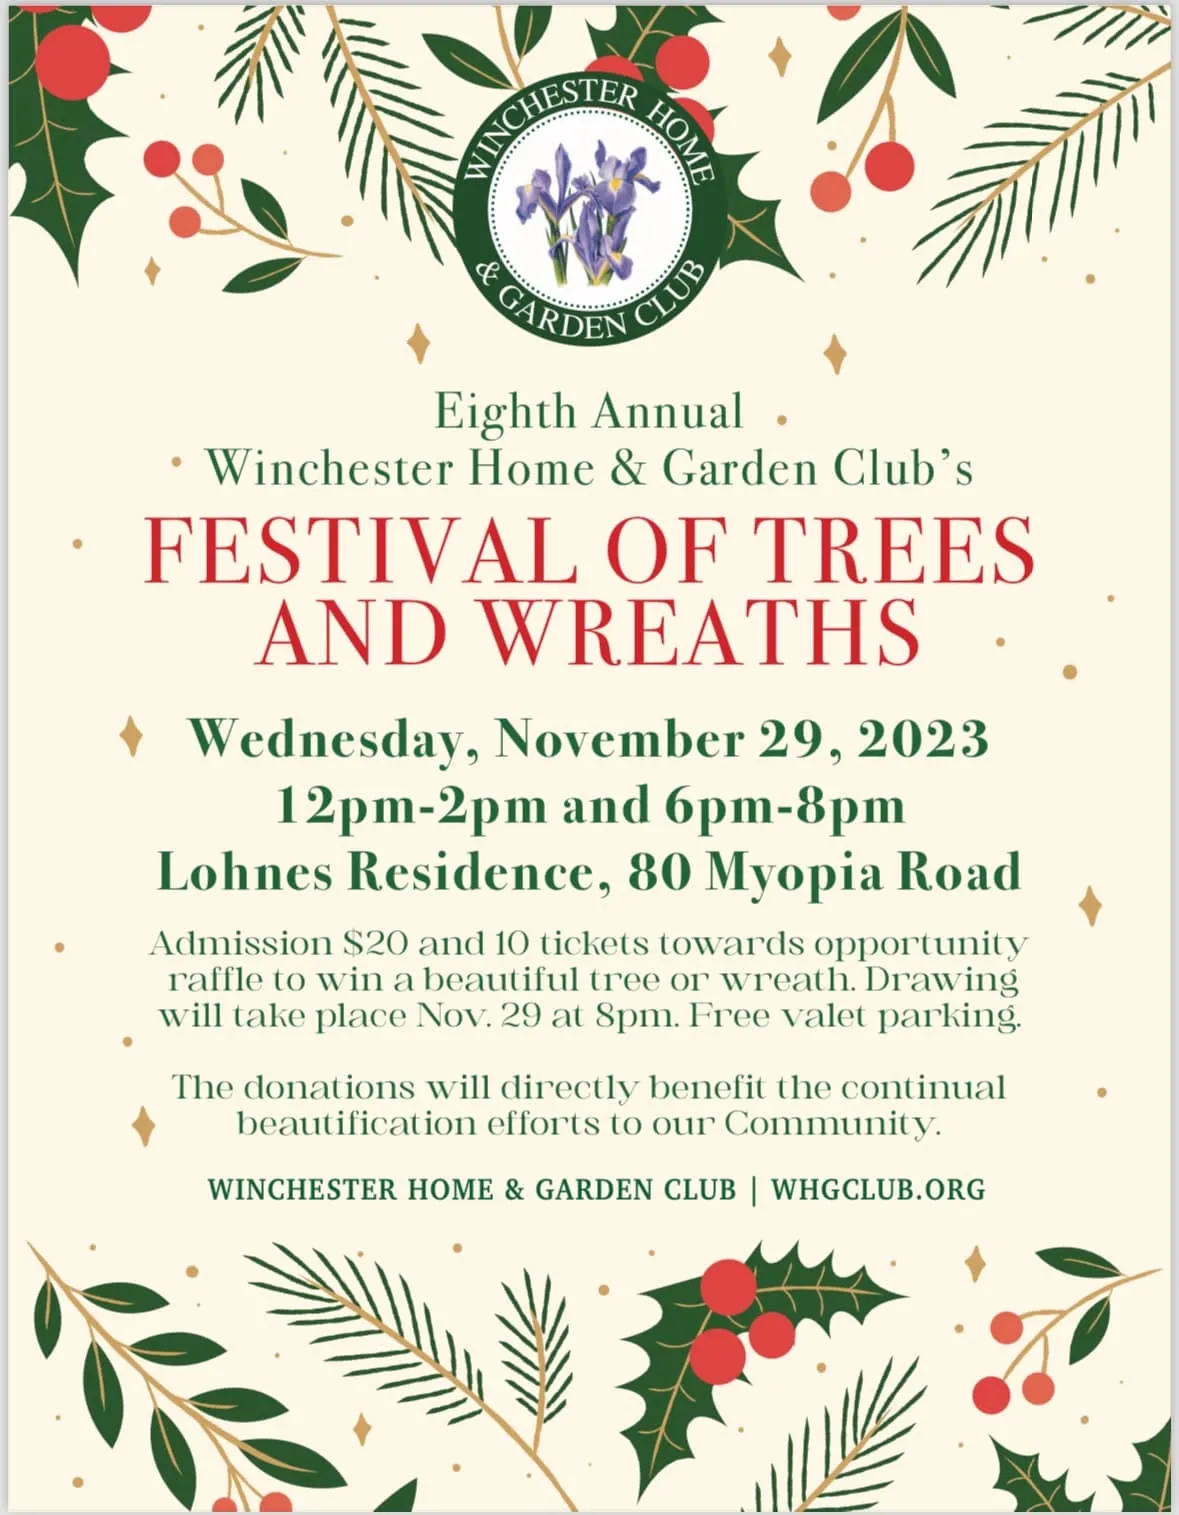 Festival of Trees and Wreaths next Wednesday